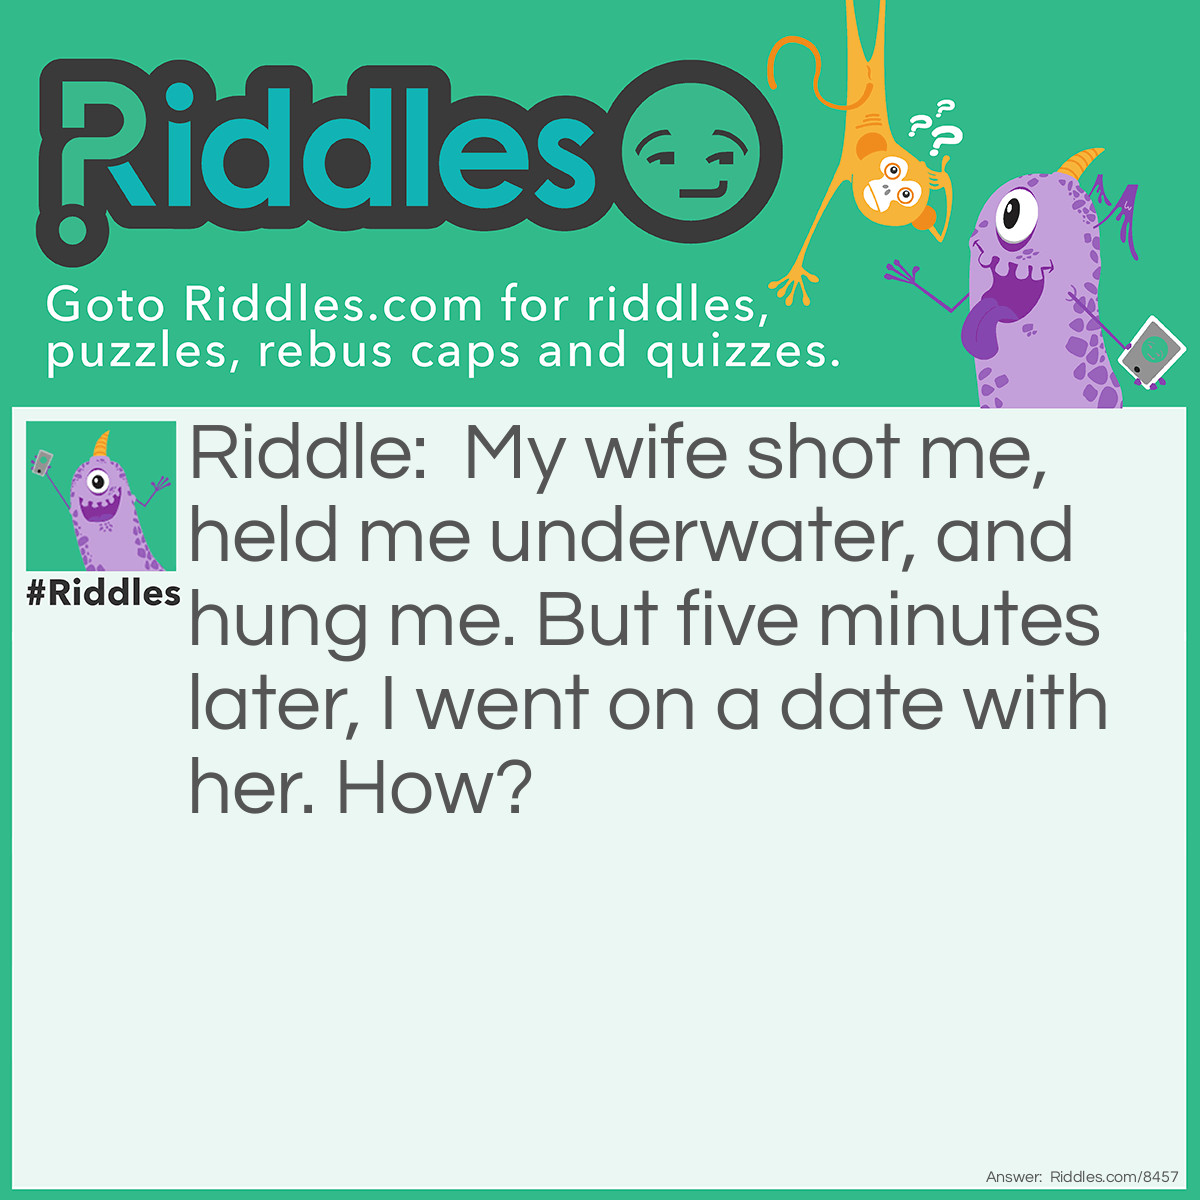 Riddle: My wife shot me, held me underwater, and hung me. But five minutes later, I went on a date with her. How? Answer: She was a photographer.